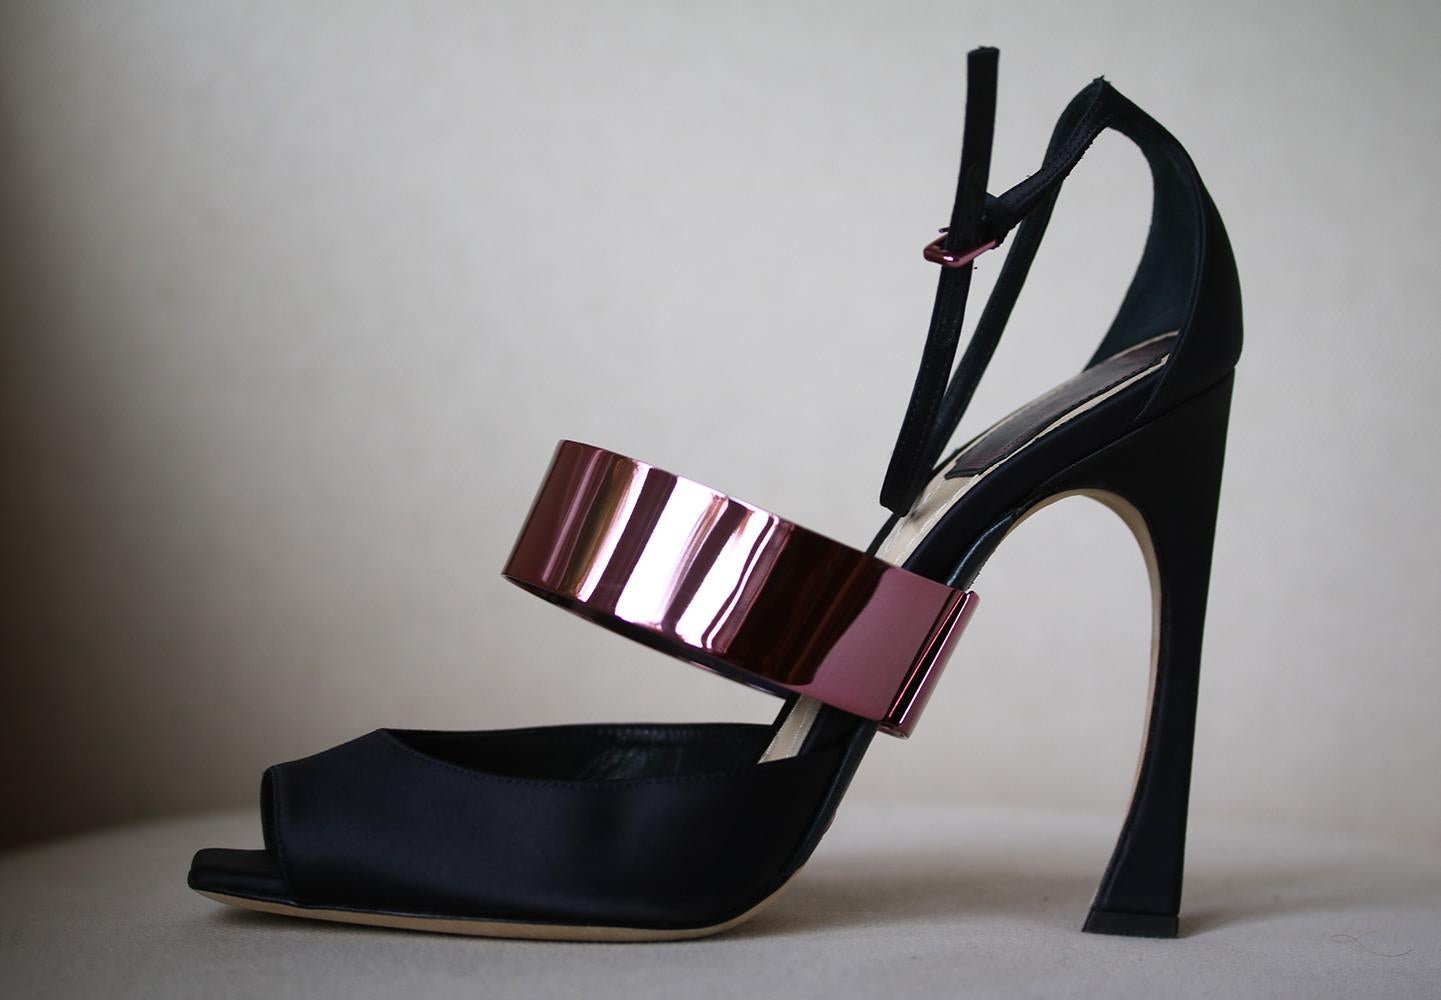 Dior Spring / Summer 2013 purple satin ankle strap heels with pink metal foot cuff. Curved heel. Buckle fastening. Open-toe. Original package includes box and dustbags. 

Size: EU 39.5 (UK 6.5, US 9.5)

Condition: Worn once. Slightest wear to the